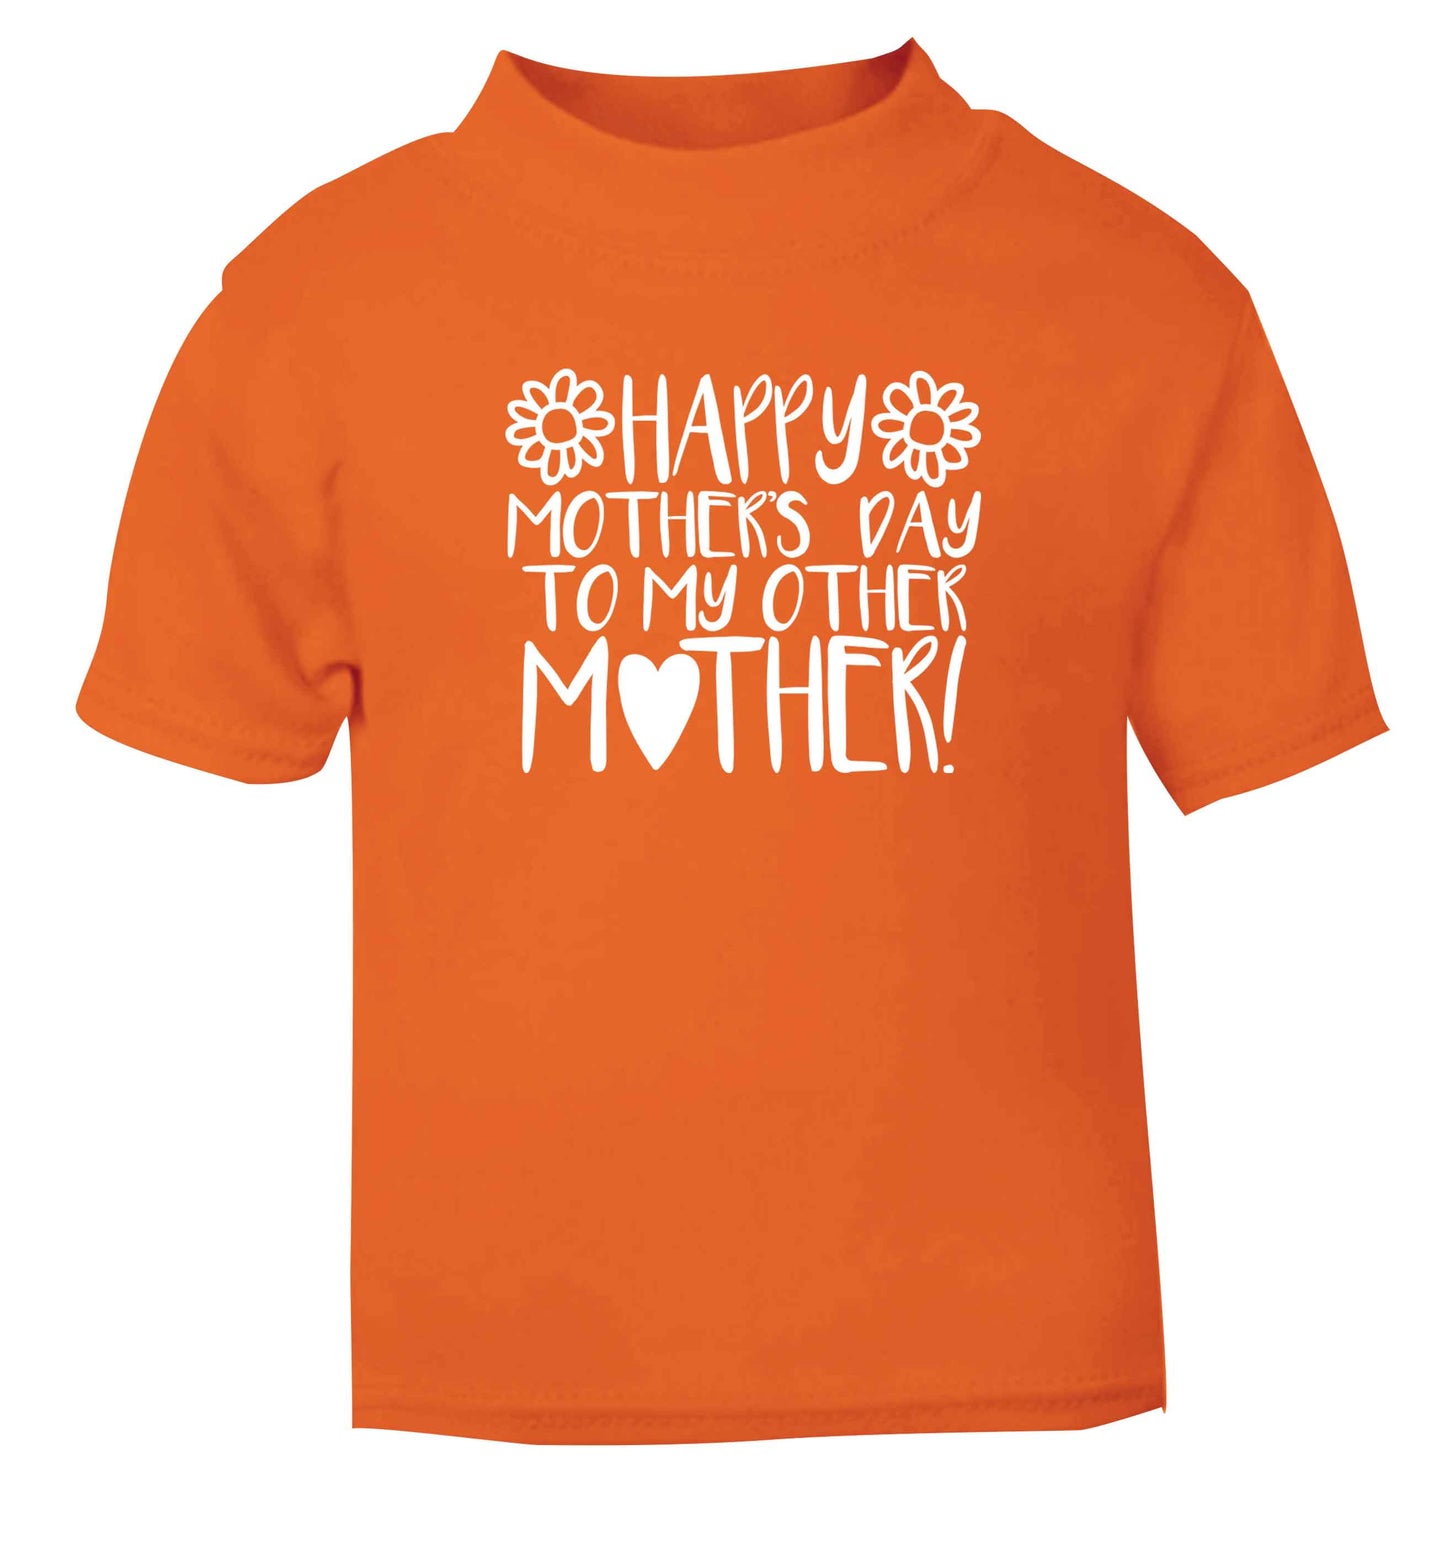 Happy mother's day to my other mother orange baby toddler Tshirt 2 Years